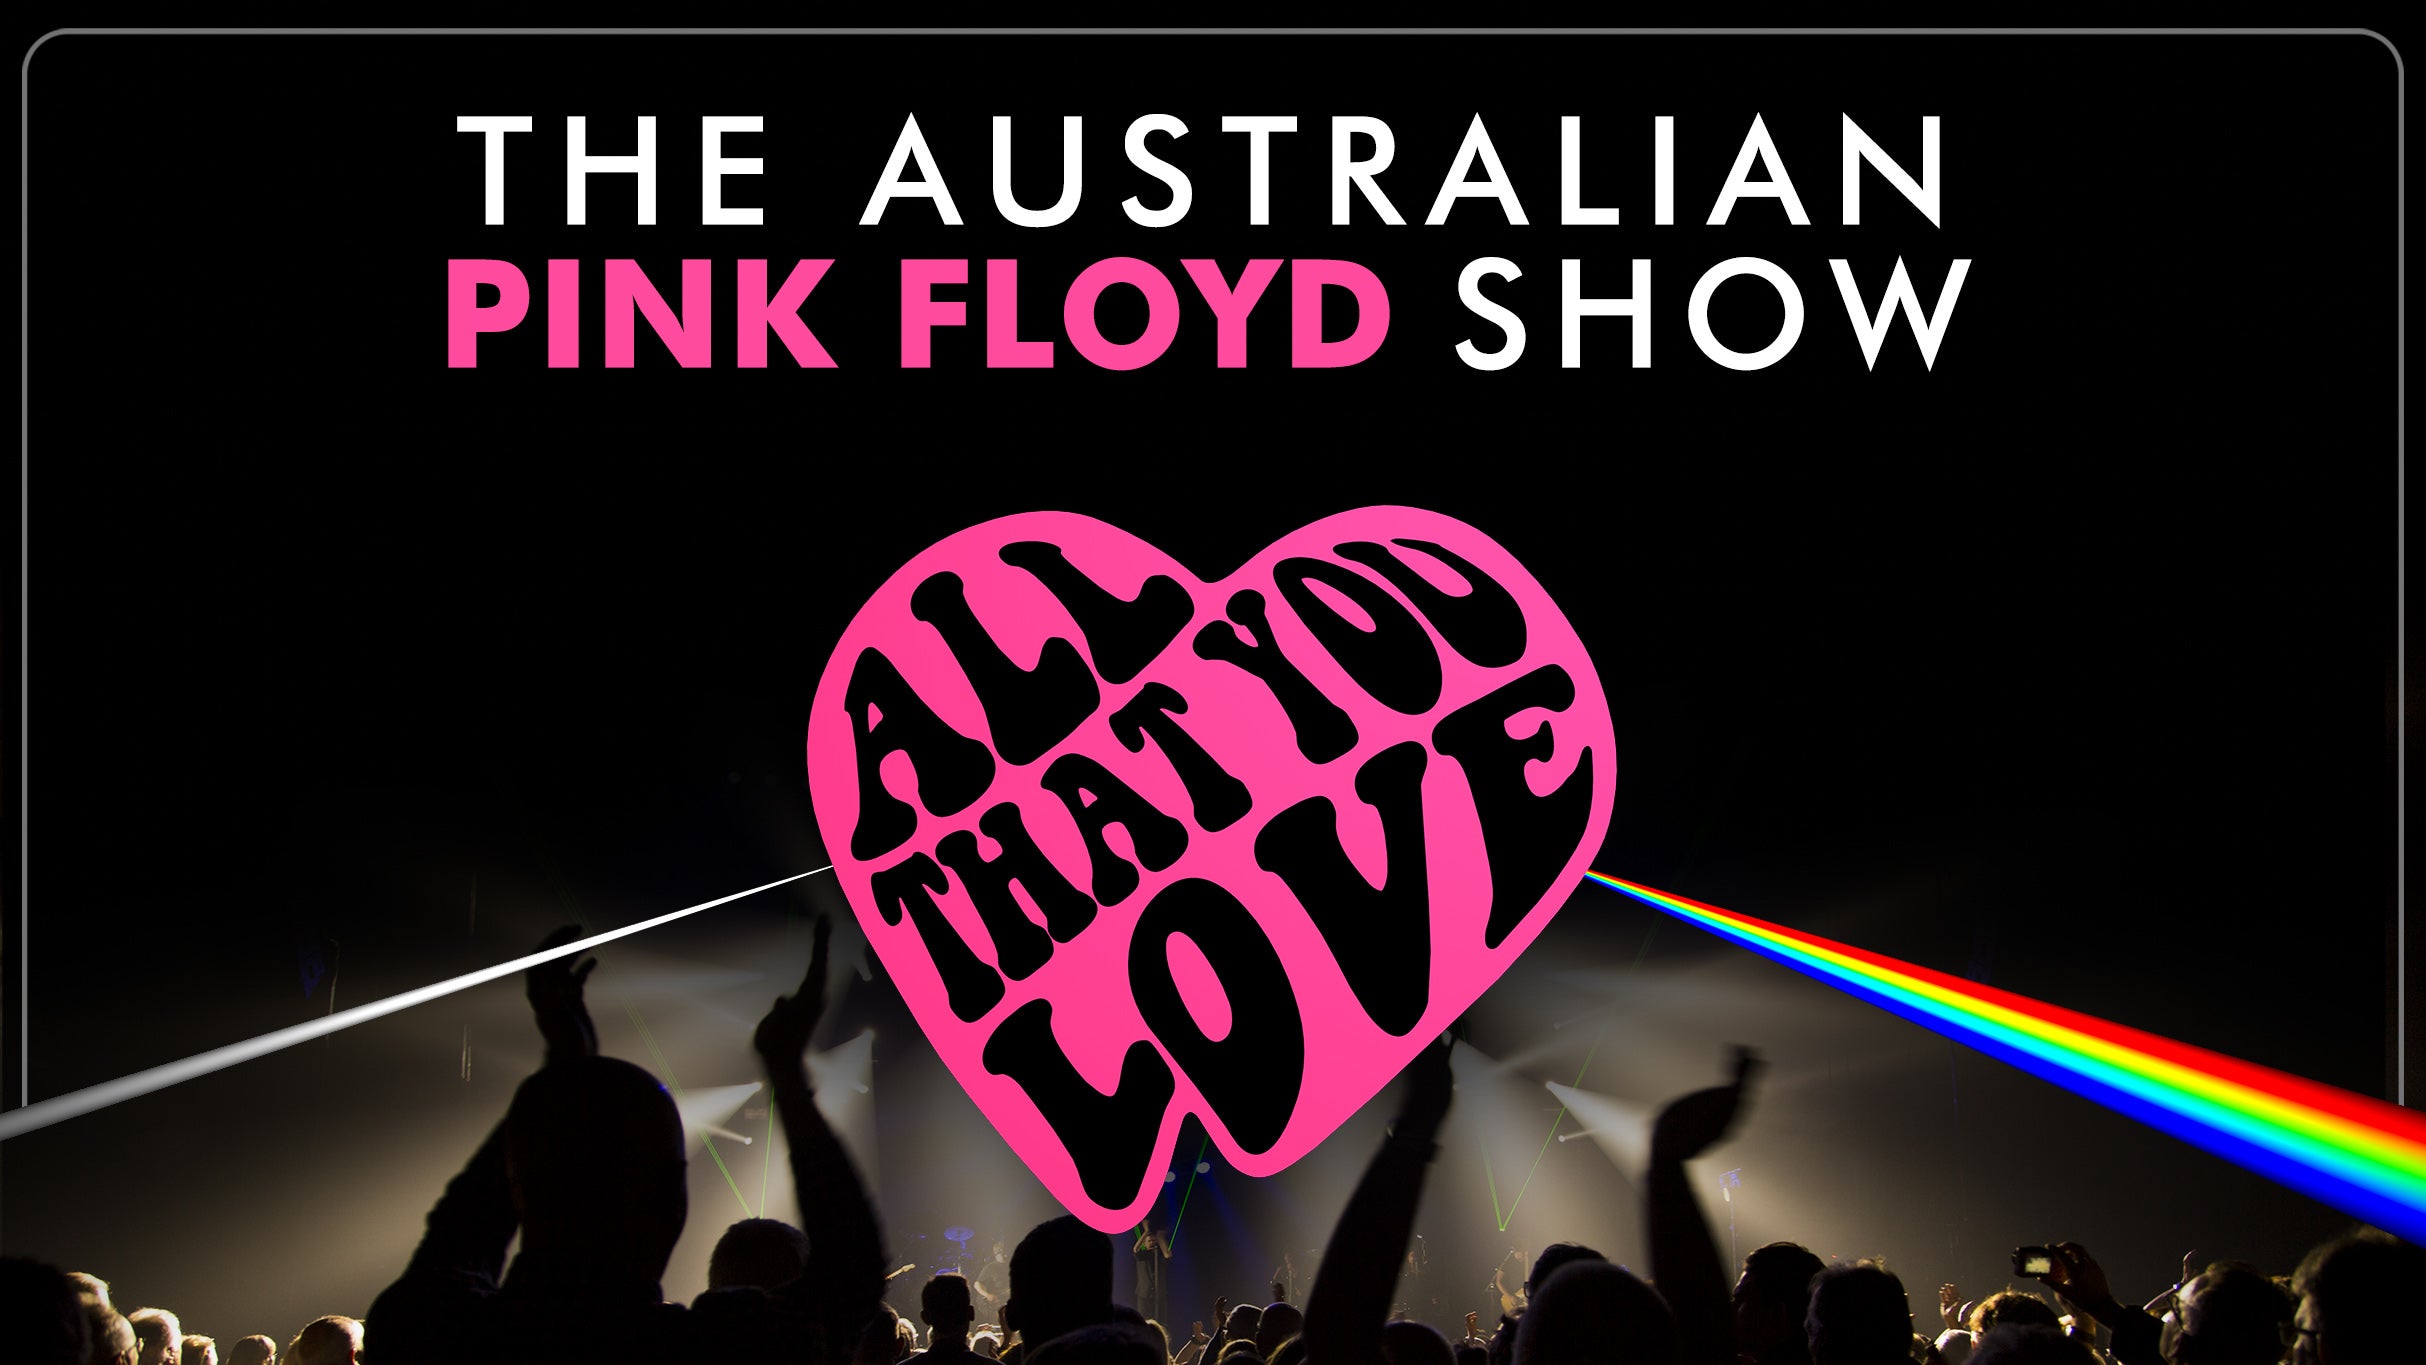 The Australian Pink Floyd Show free pre-sale pa55w0rd for early tickets in San Antonio